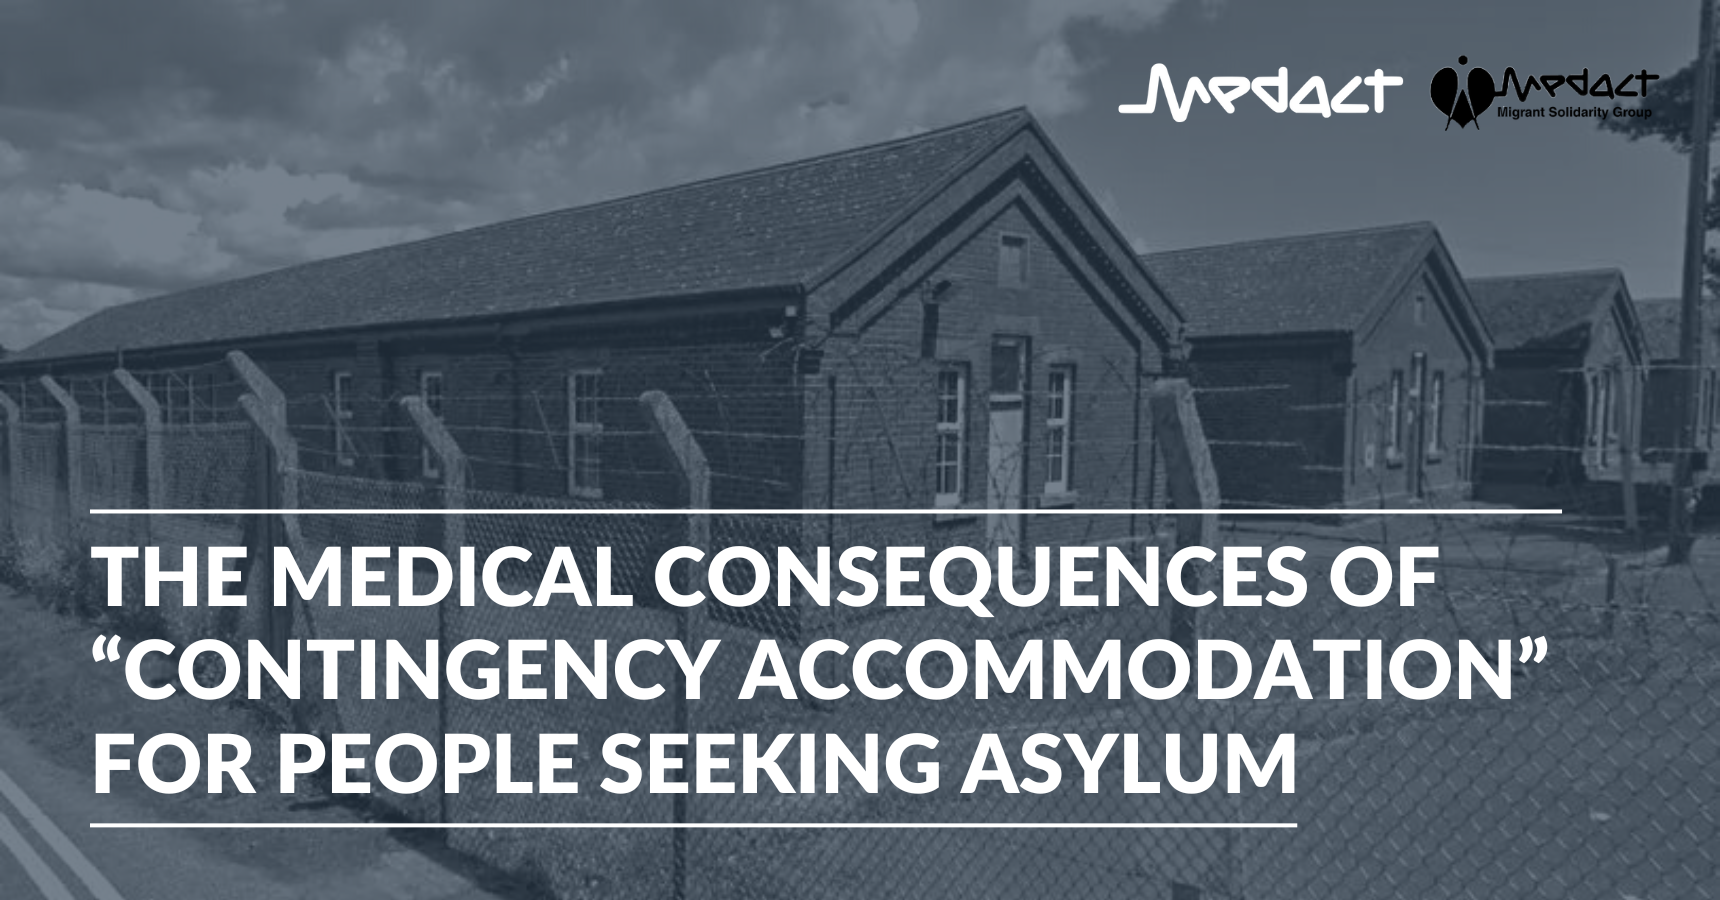 The Medical Consequences of “Contingency Accommodation” for People Seeking Asylum